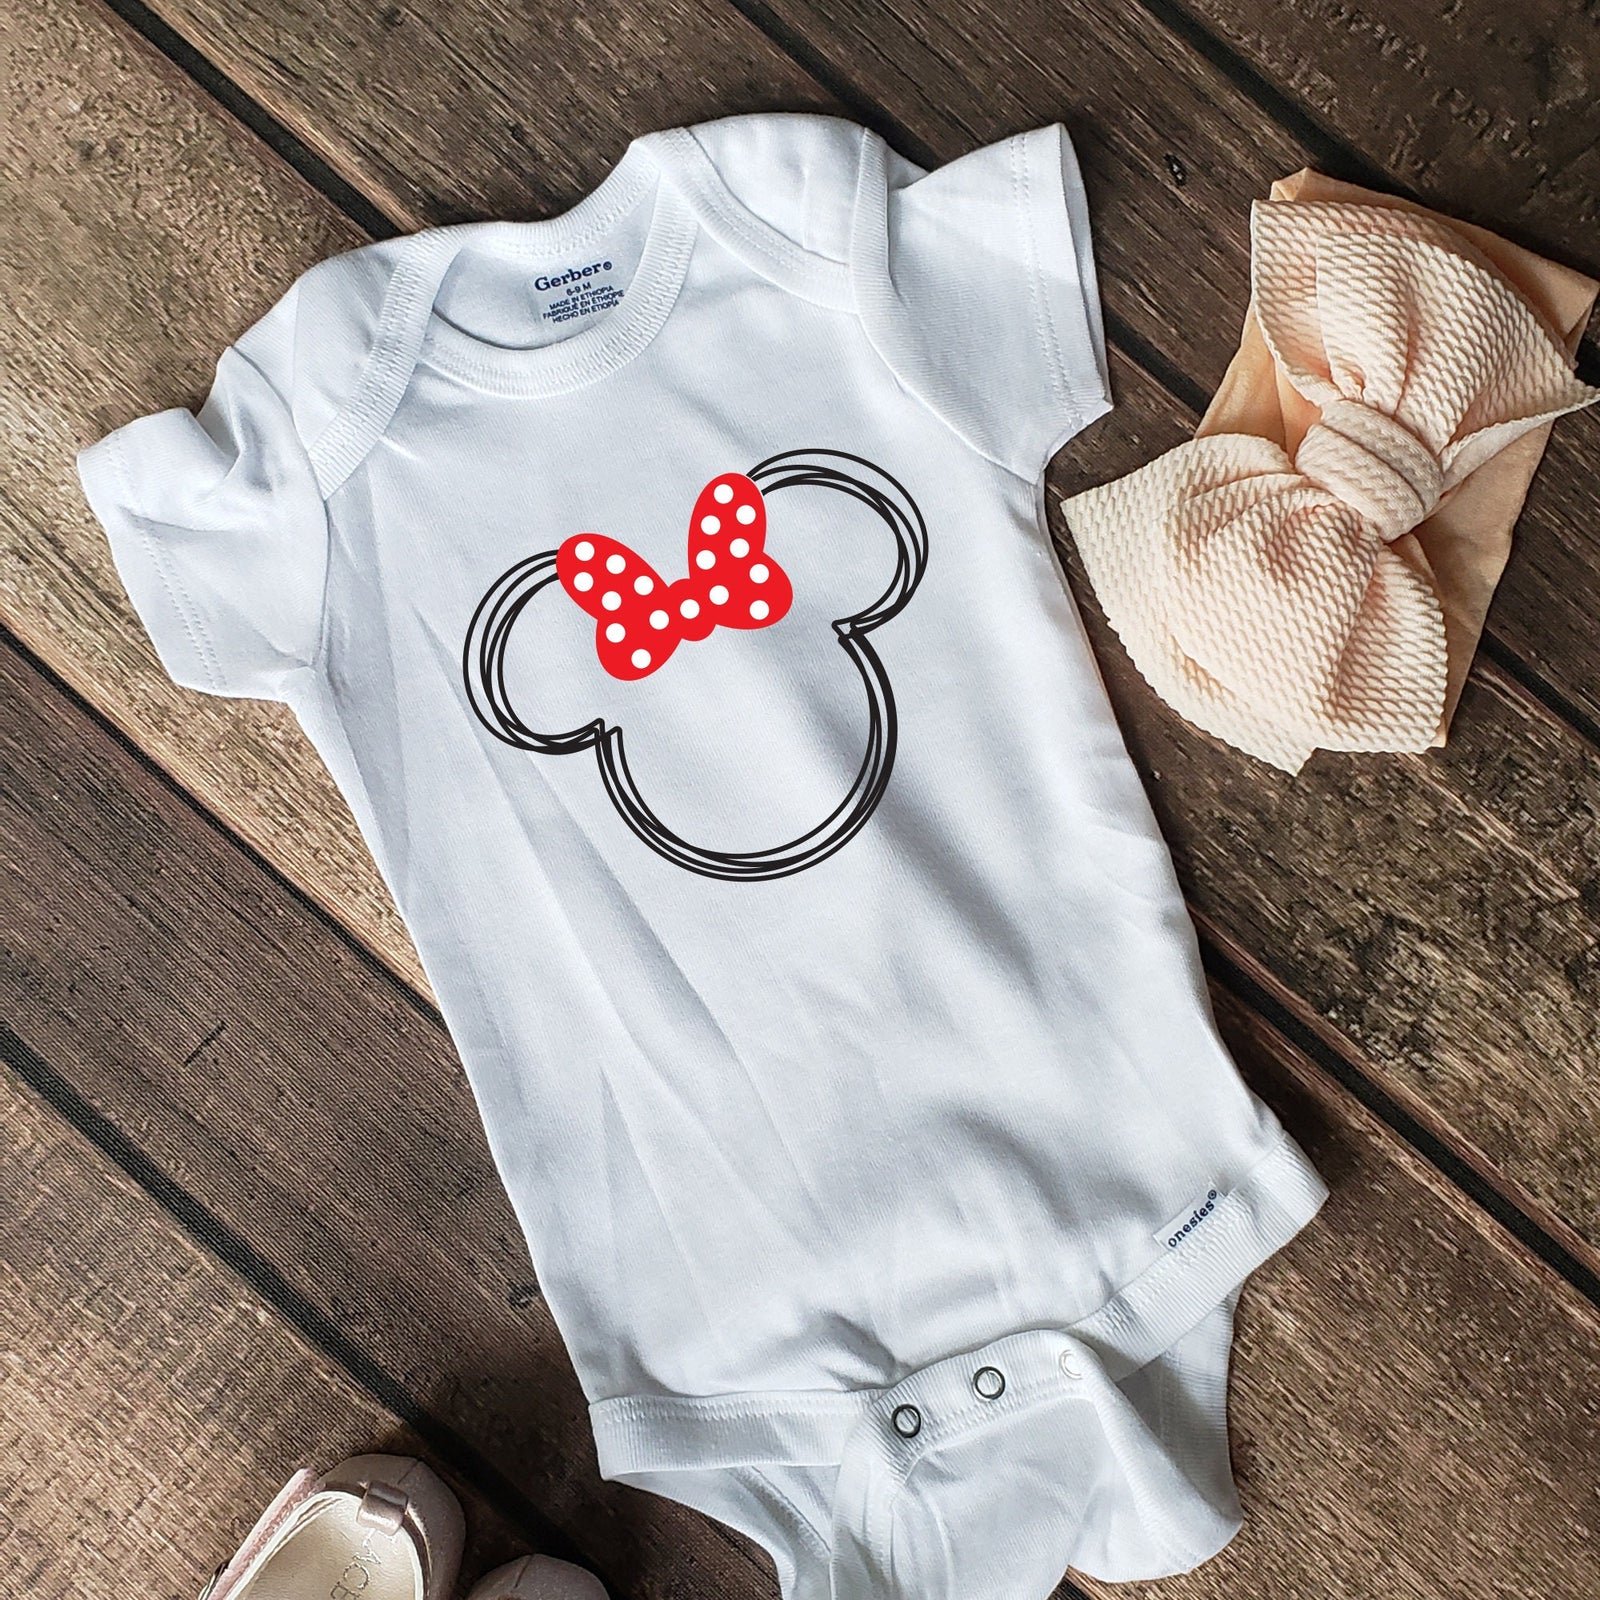 Minnie Scribble Hand Drawn Outline - Baby Minnie Mouse -  Infant Onesie - 1st Time Visit